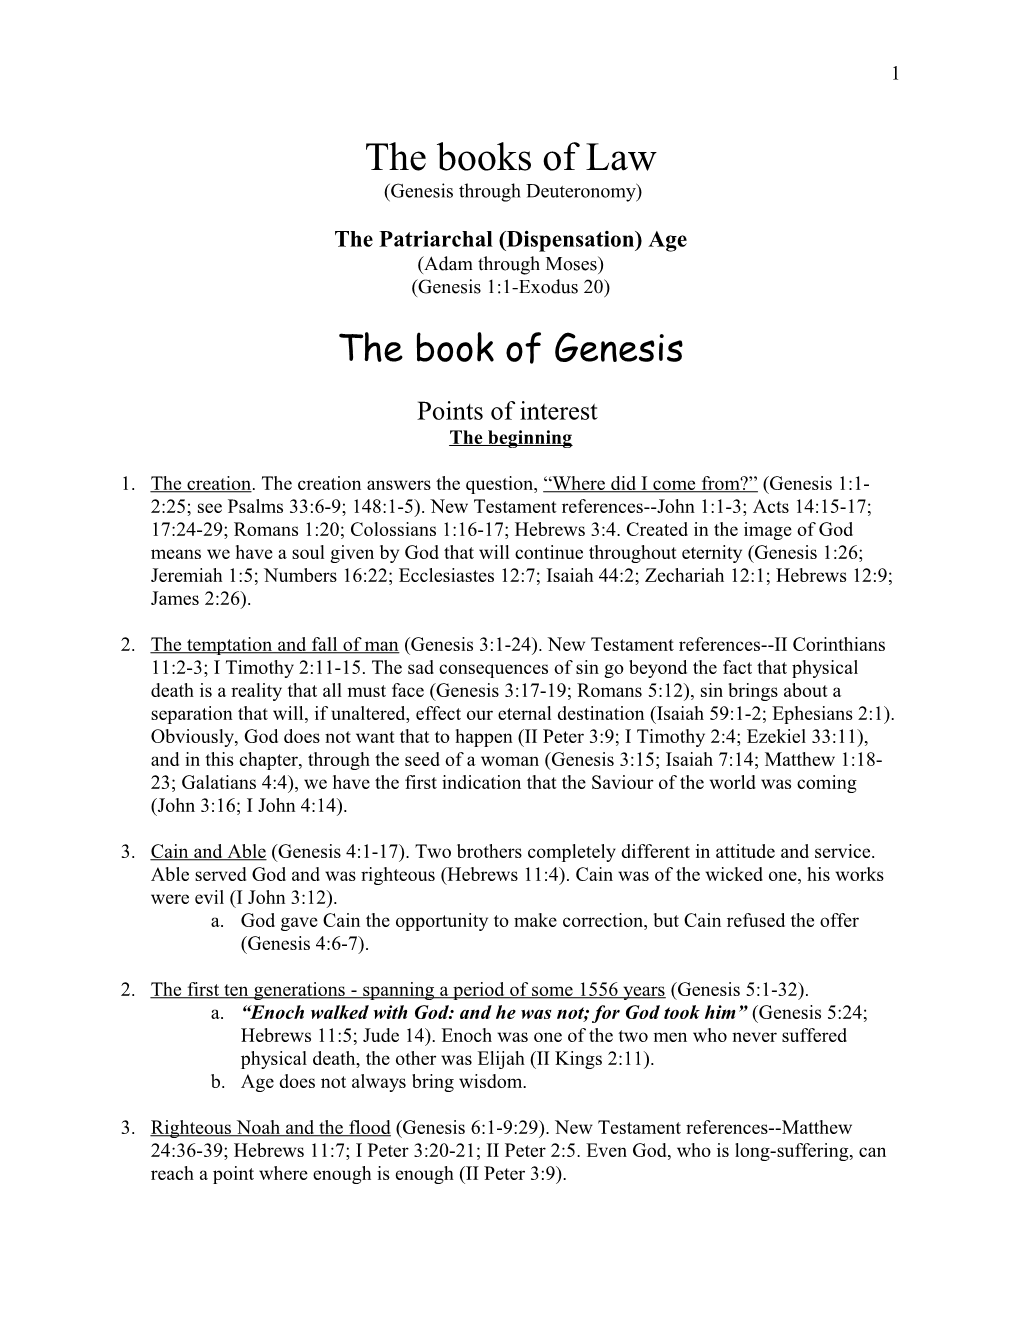 The Books of Law